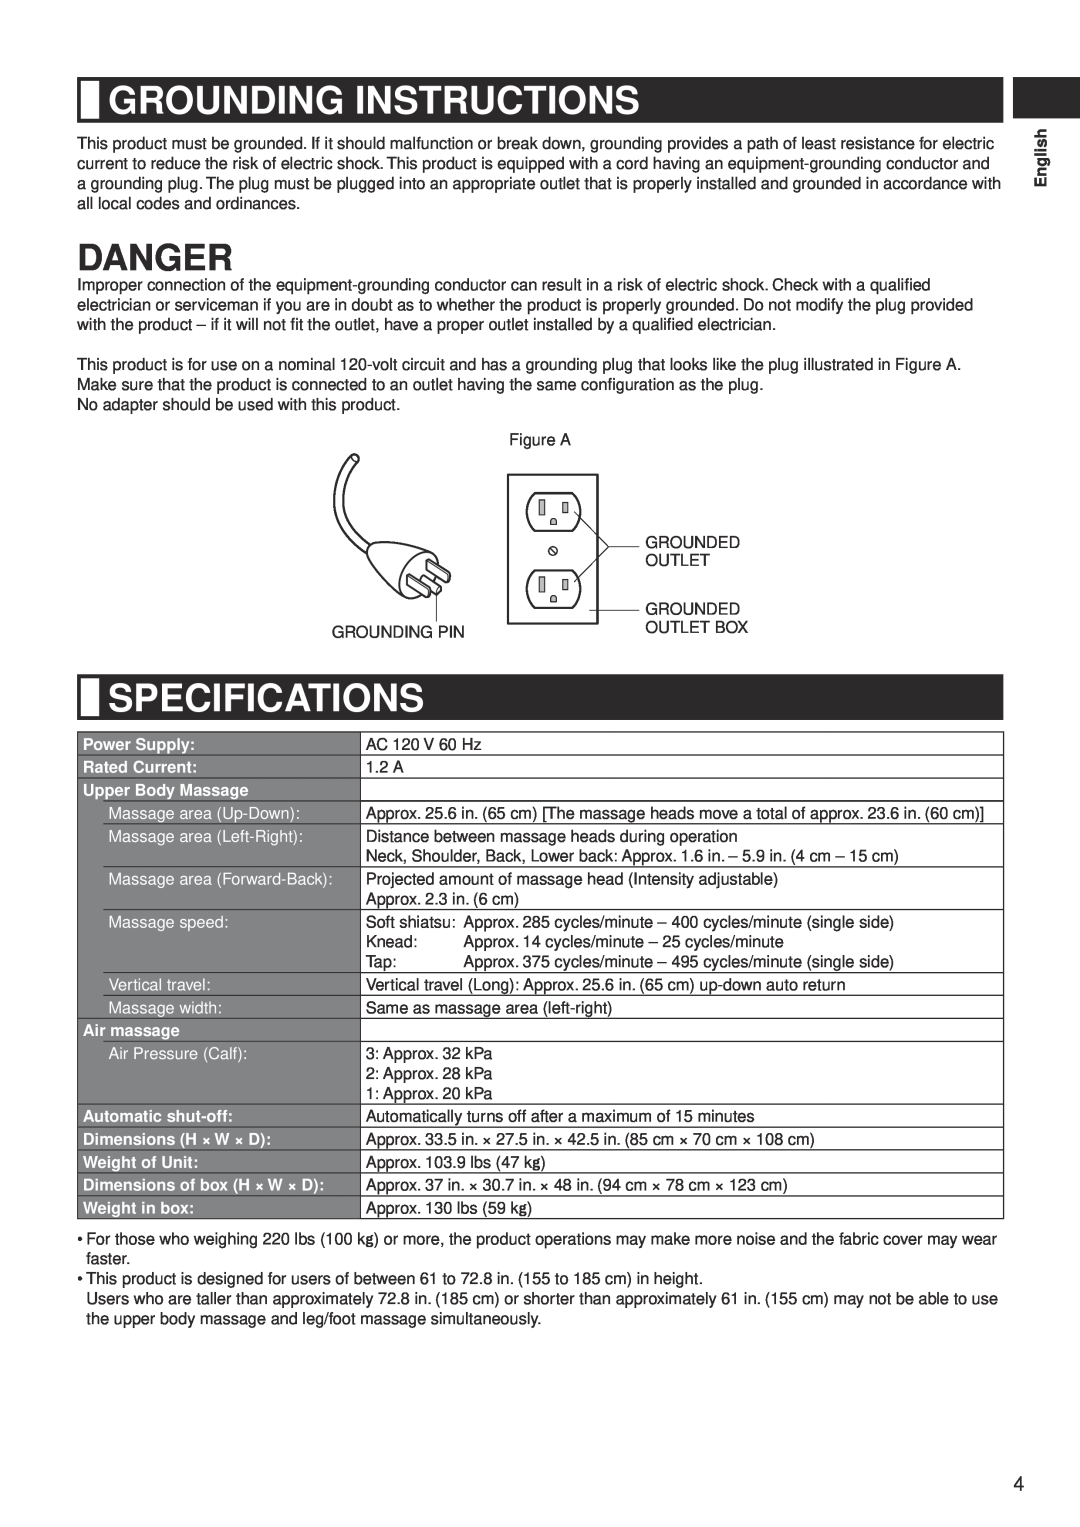 Panasonic EP-MS40 manual Grounding Instructions, Specifications, Danger, Power Supply, Rated Current, Upper Body Massage 